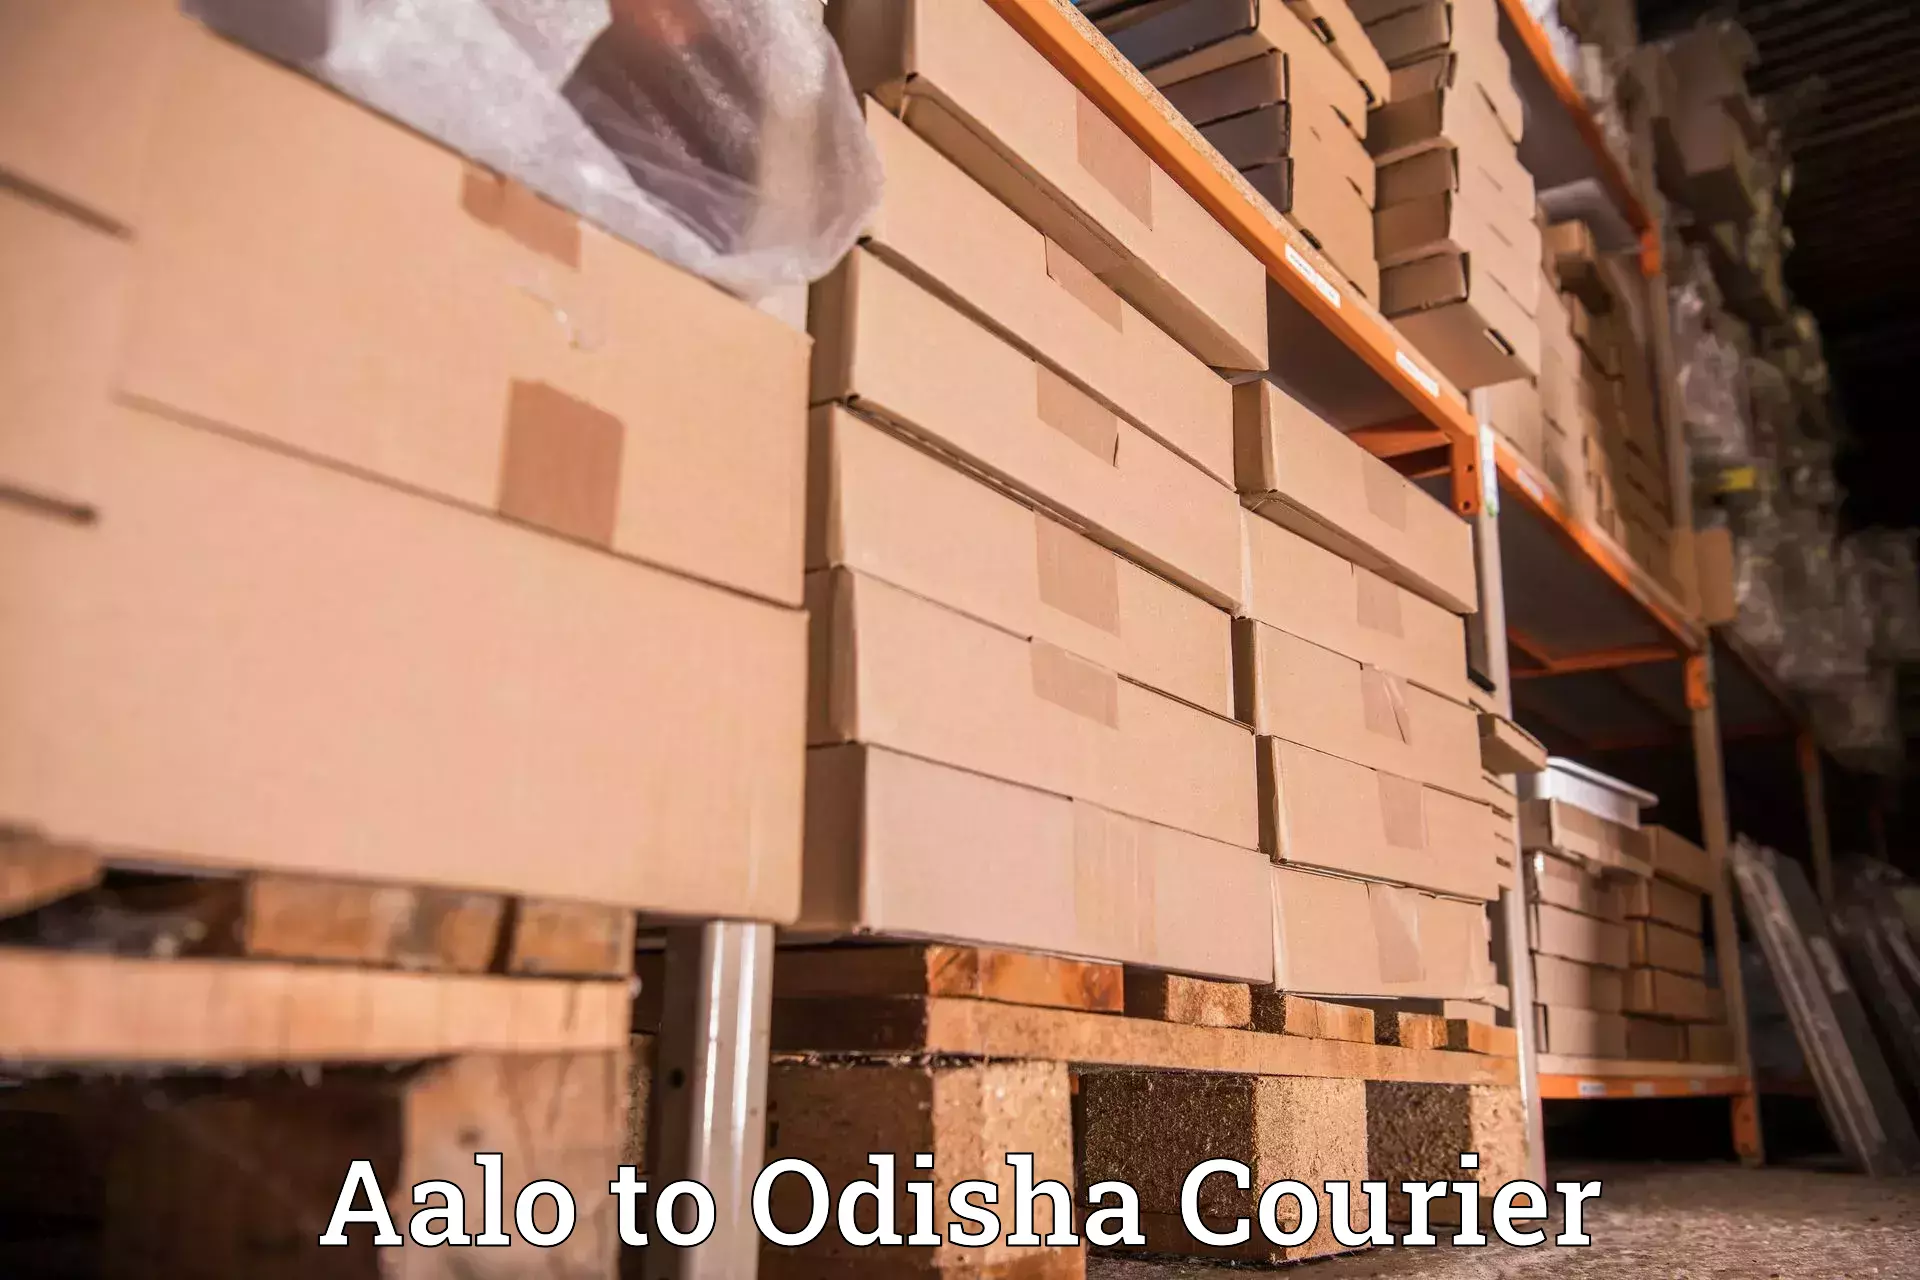 Courier service efficiency Aalo to Odisha